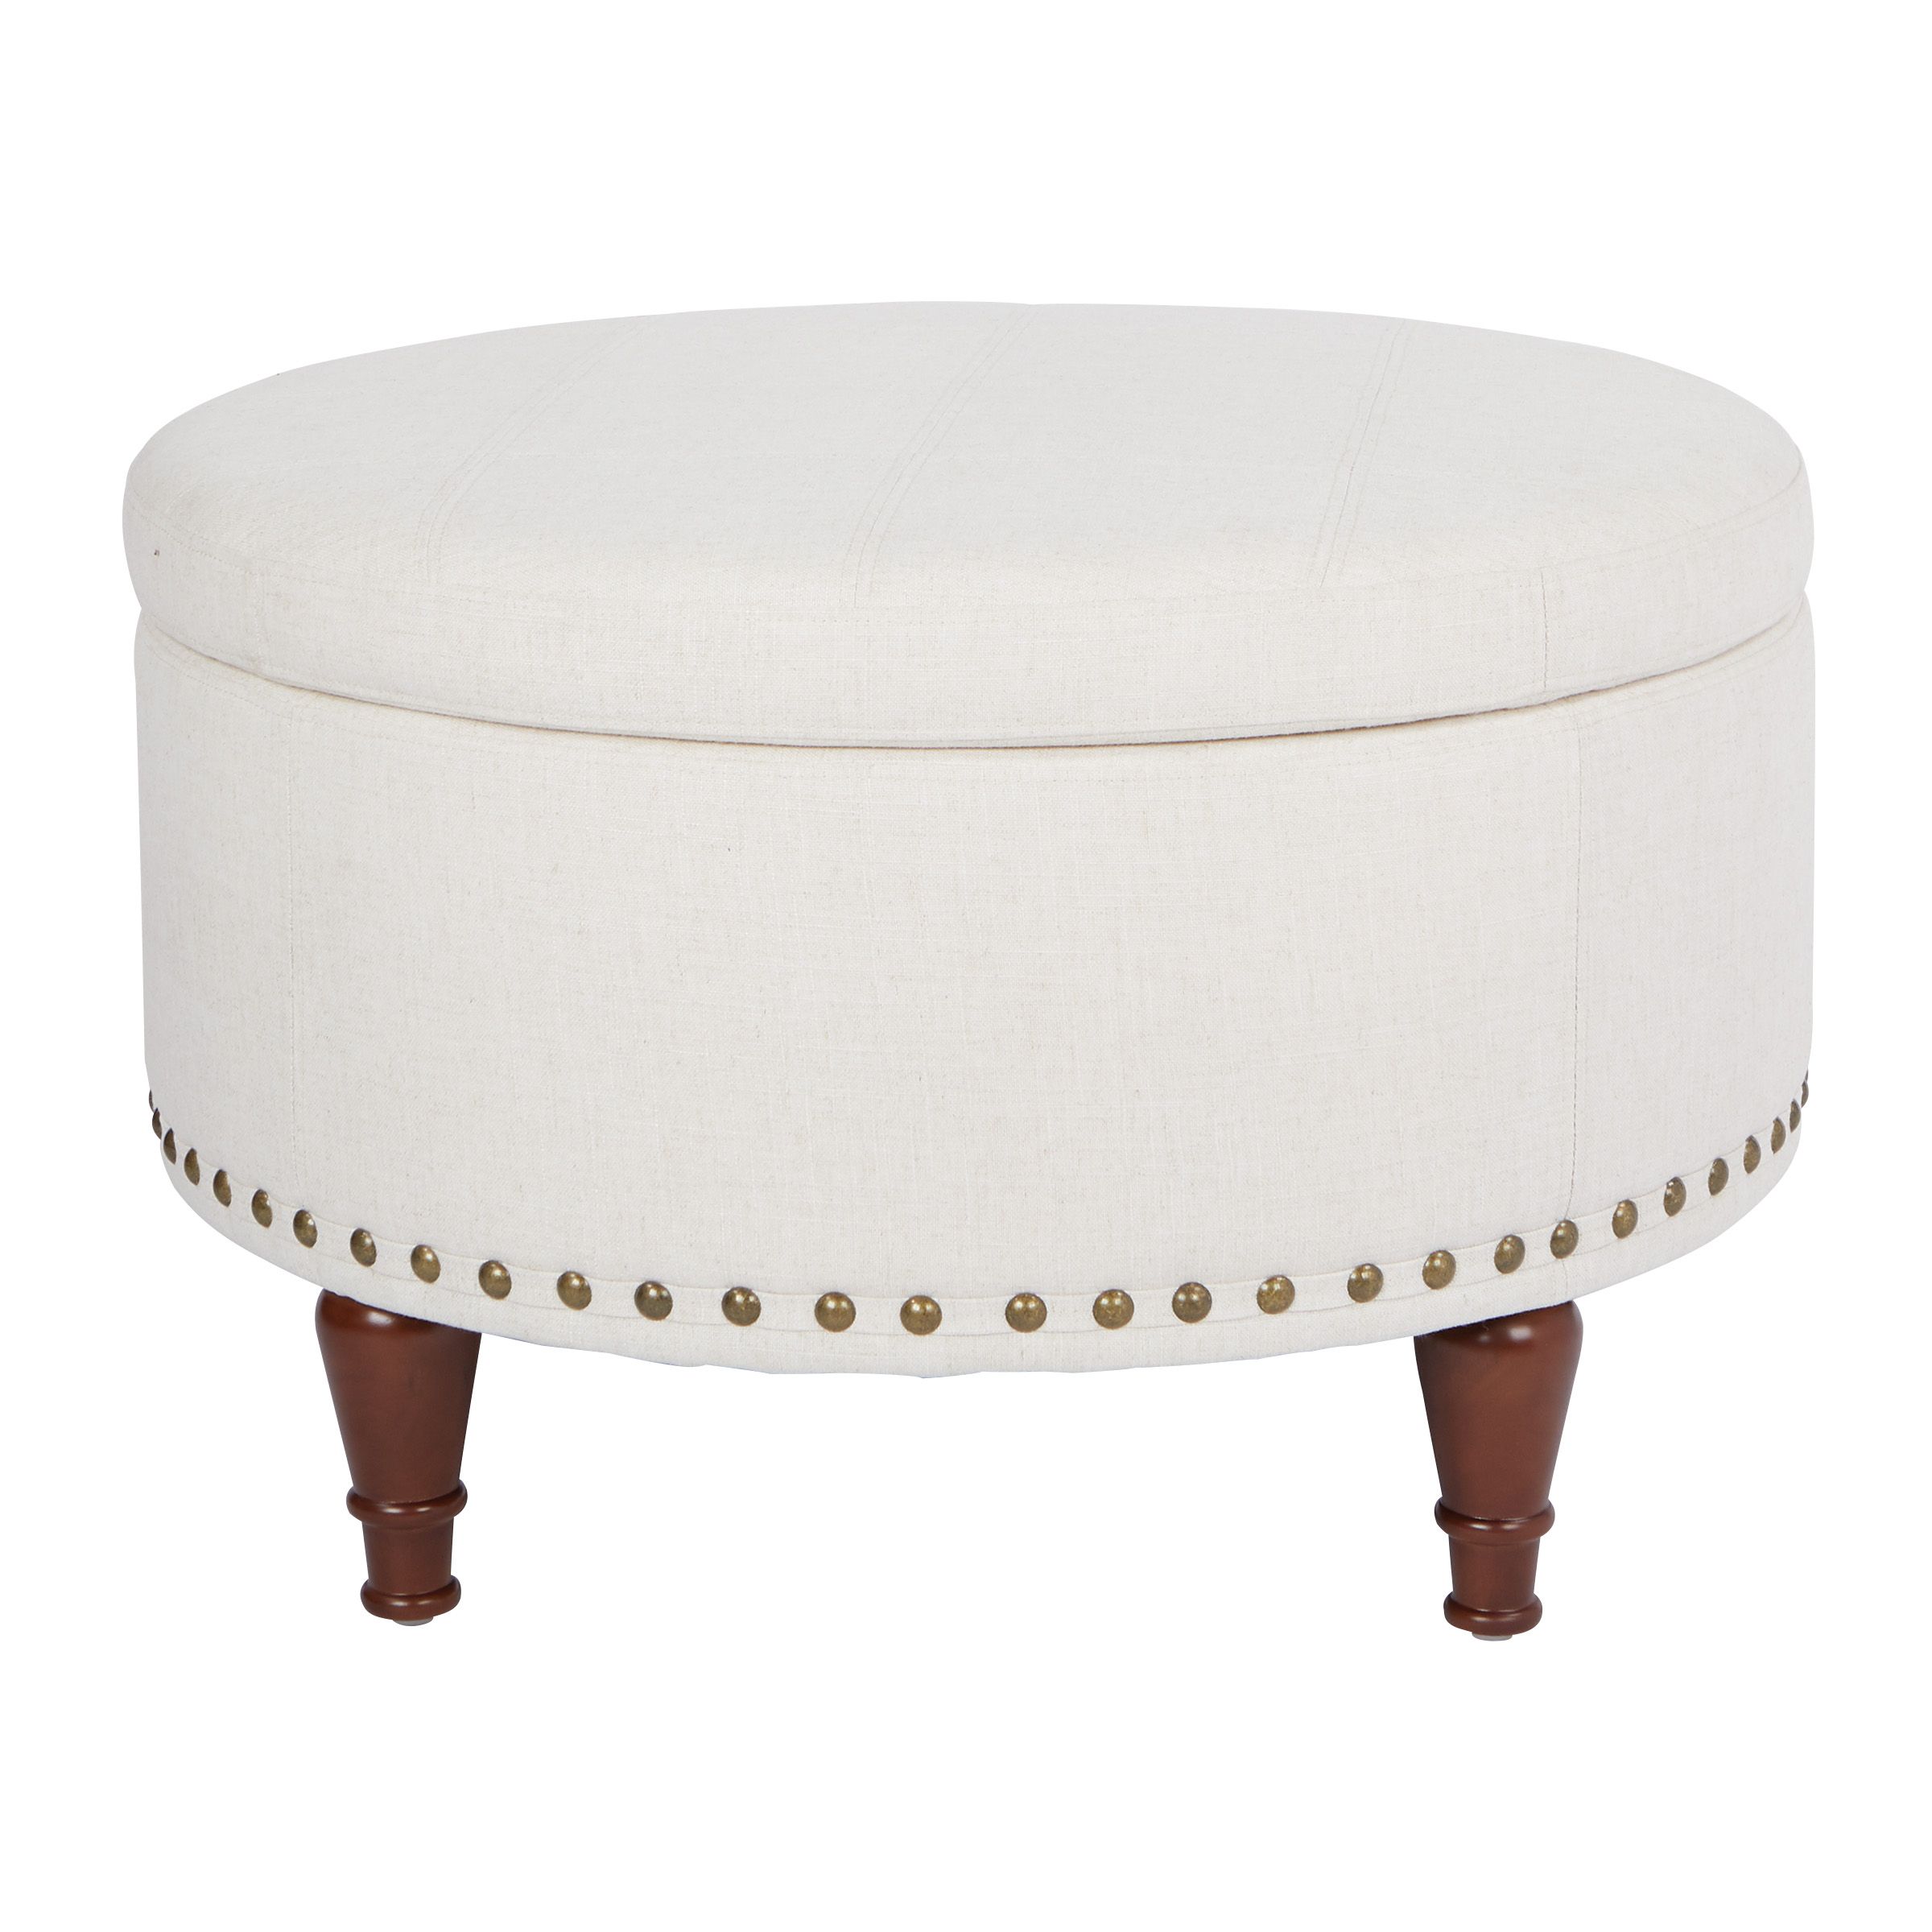 Alloway Storage Ottoman In Linen Fabric With Antique Bronze Nailheads Inside Lavender Fabric Storage Ottomans (View 18 of 20)